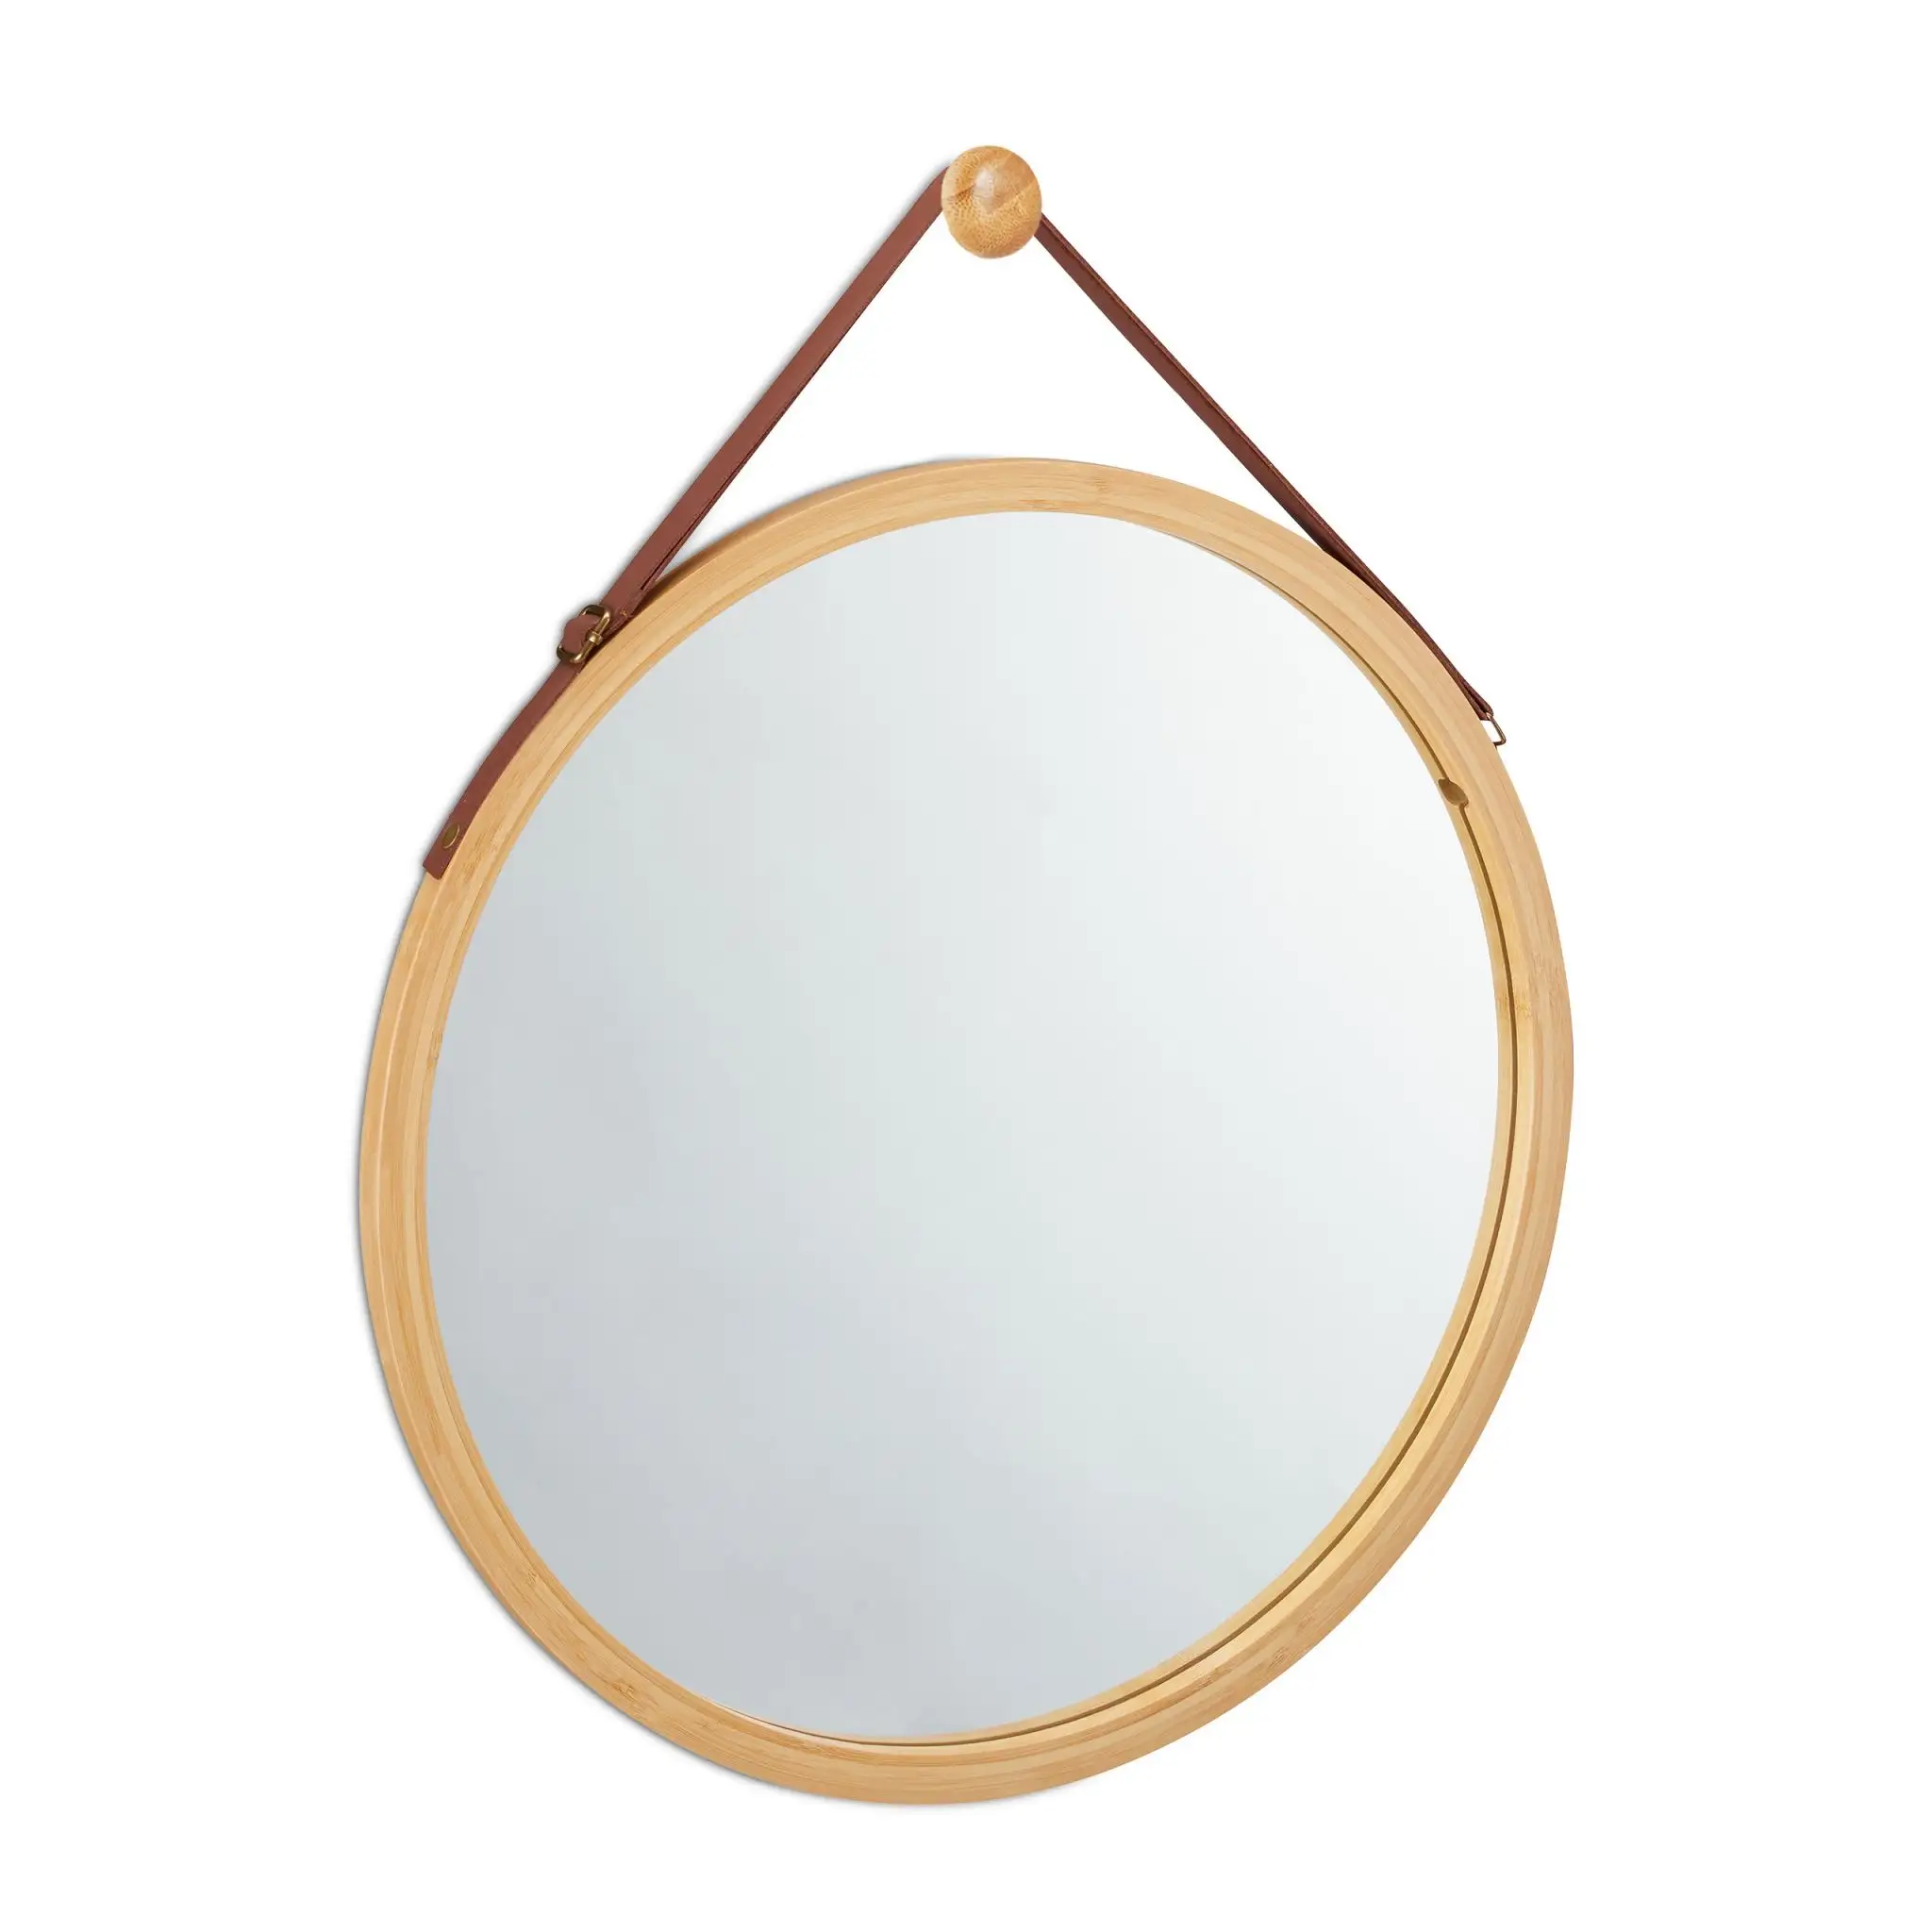 Bathroom Bedroom Solid Bamboo Frame Mirror Adjustable Leather Strap Hanging Round Wall Mirror